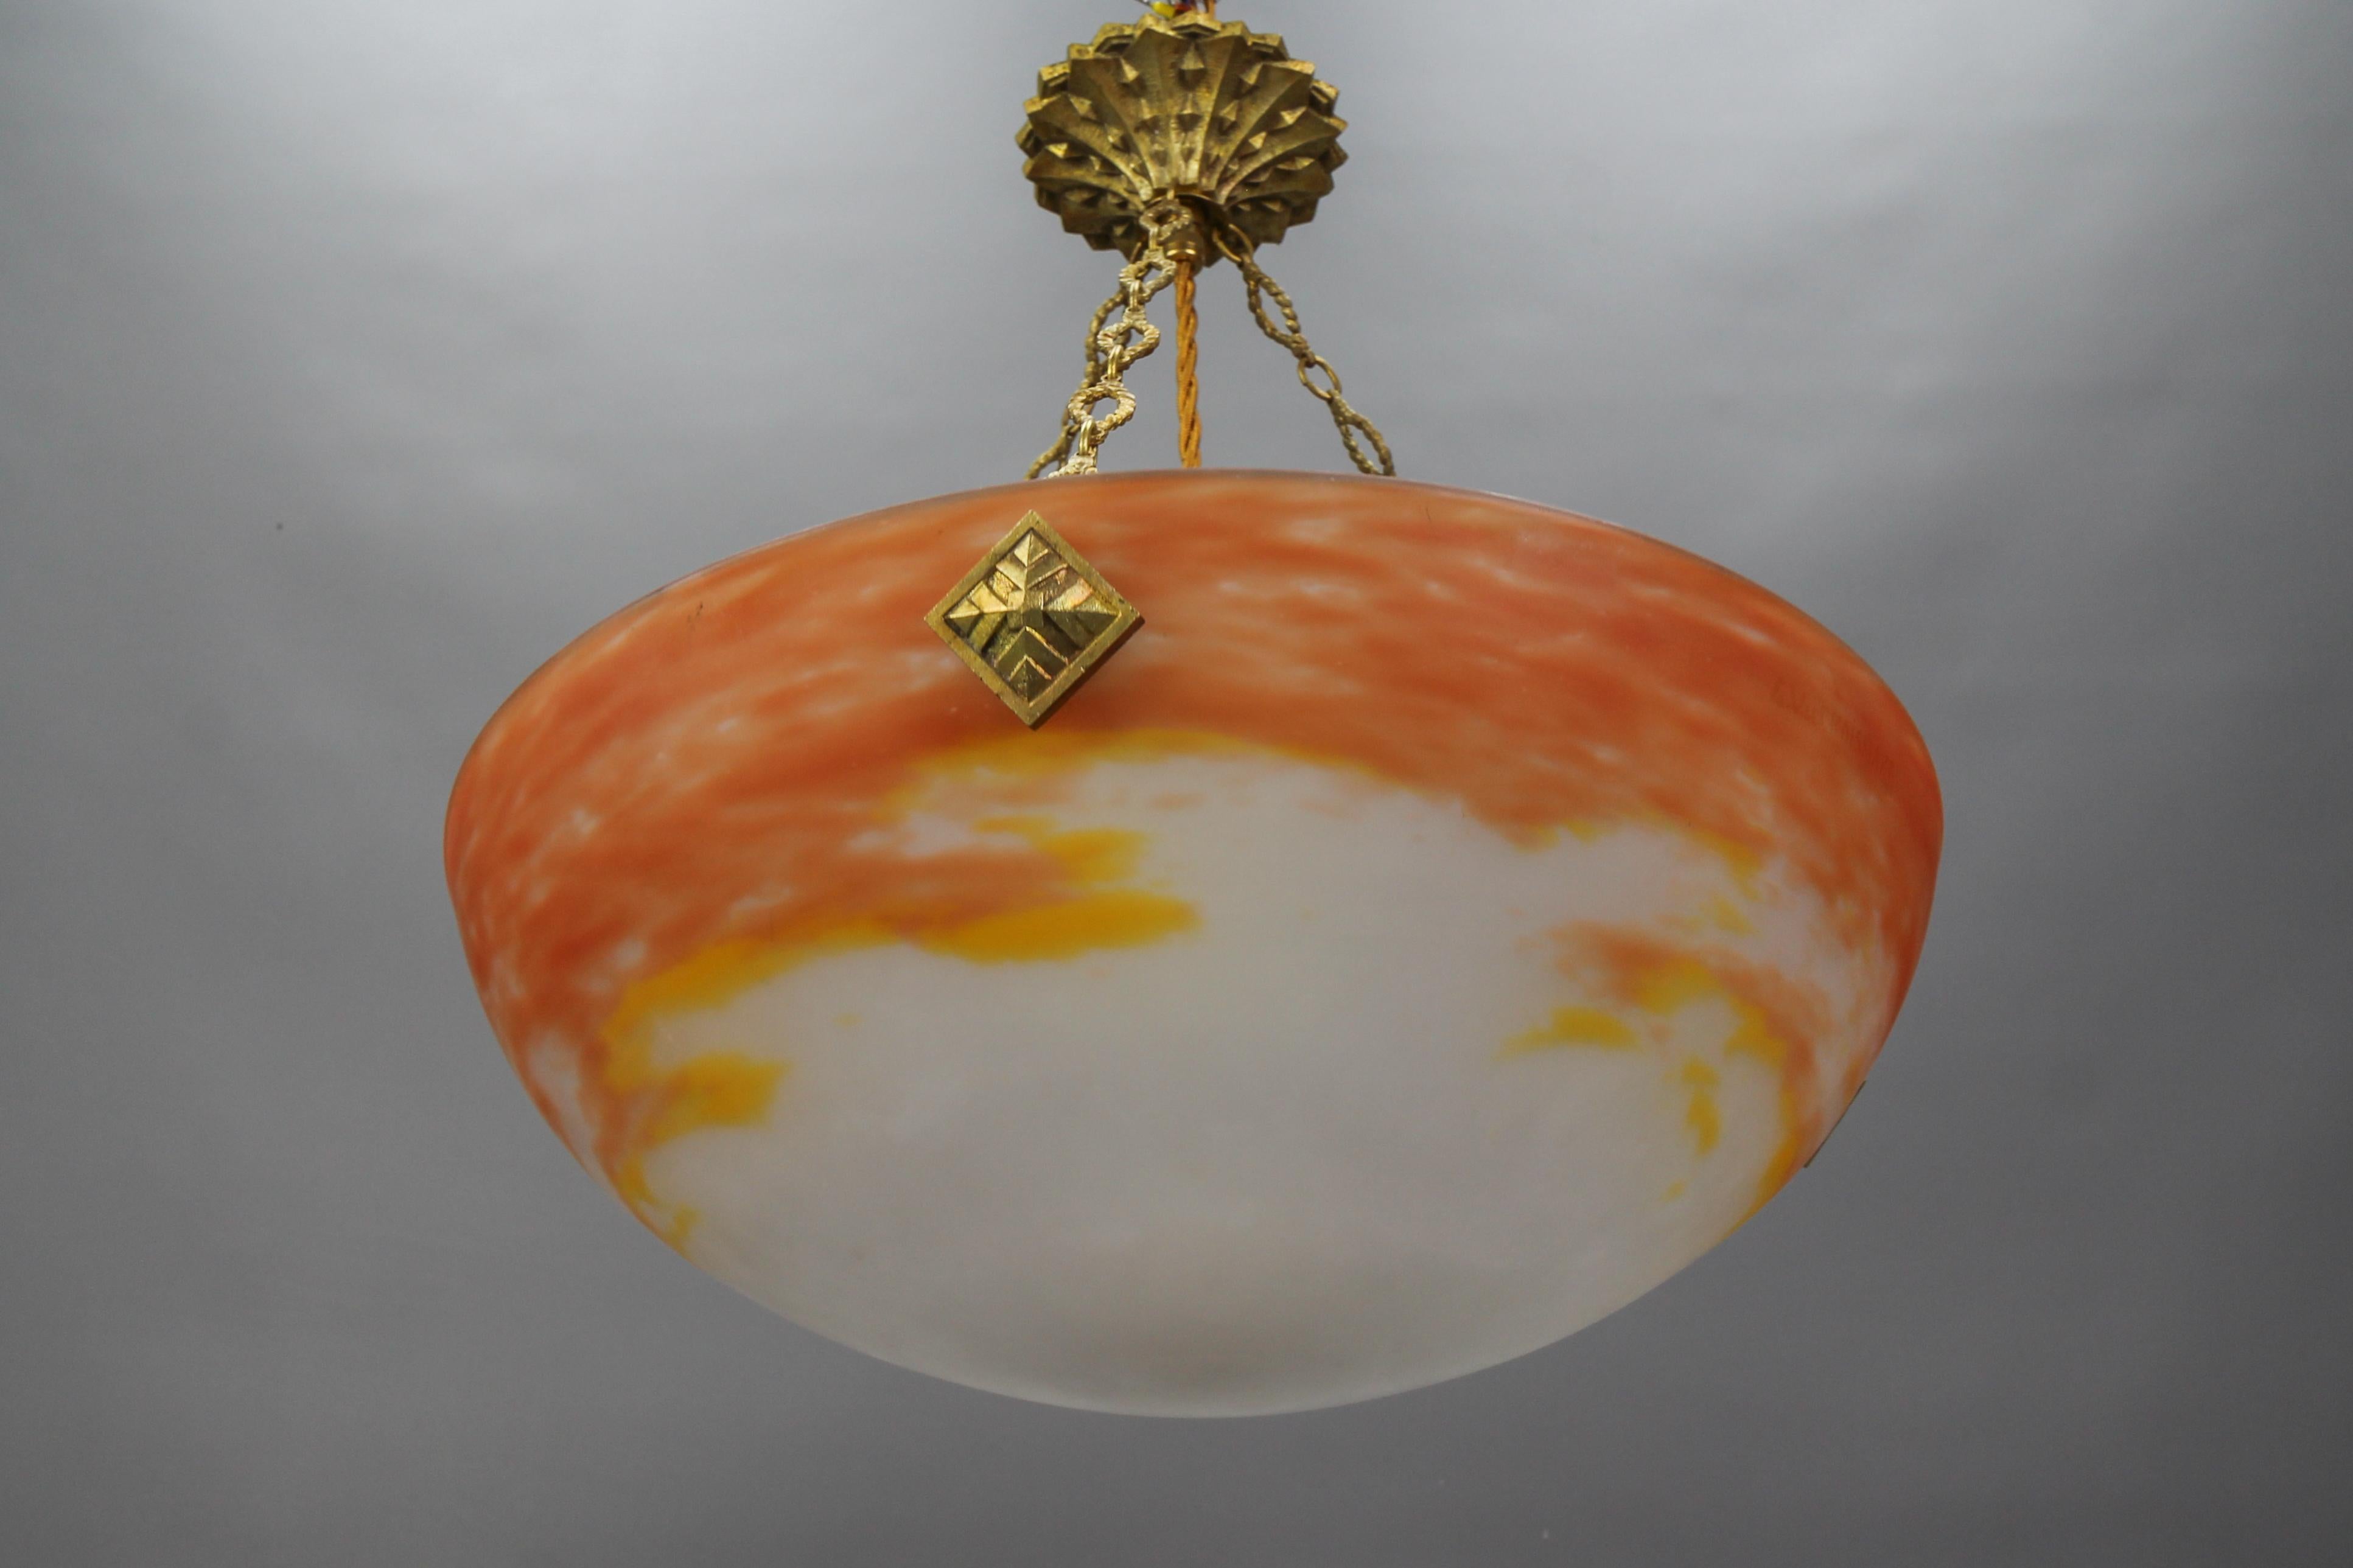 French Art Deco orange and white Pâte de Verre glass and bronze pendant light by G.V. de Croismare, Muller Frères Luneville from the 1920s.
This pendant light is a stunning piece from the French Art Deco period. The bowl is made of orange and white